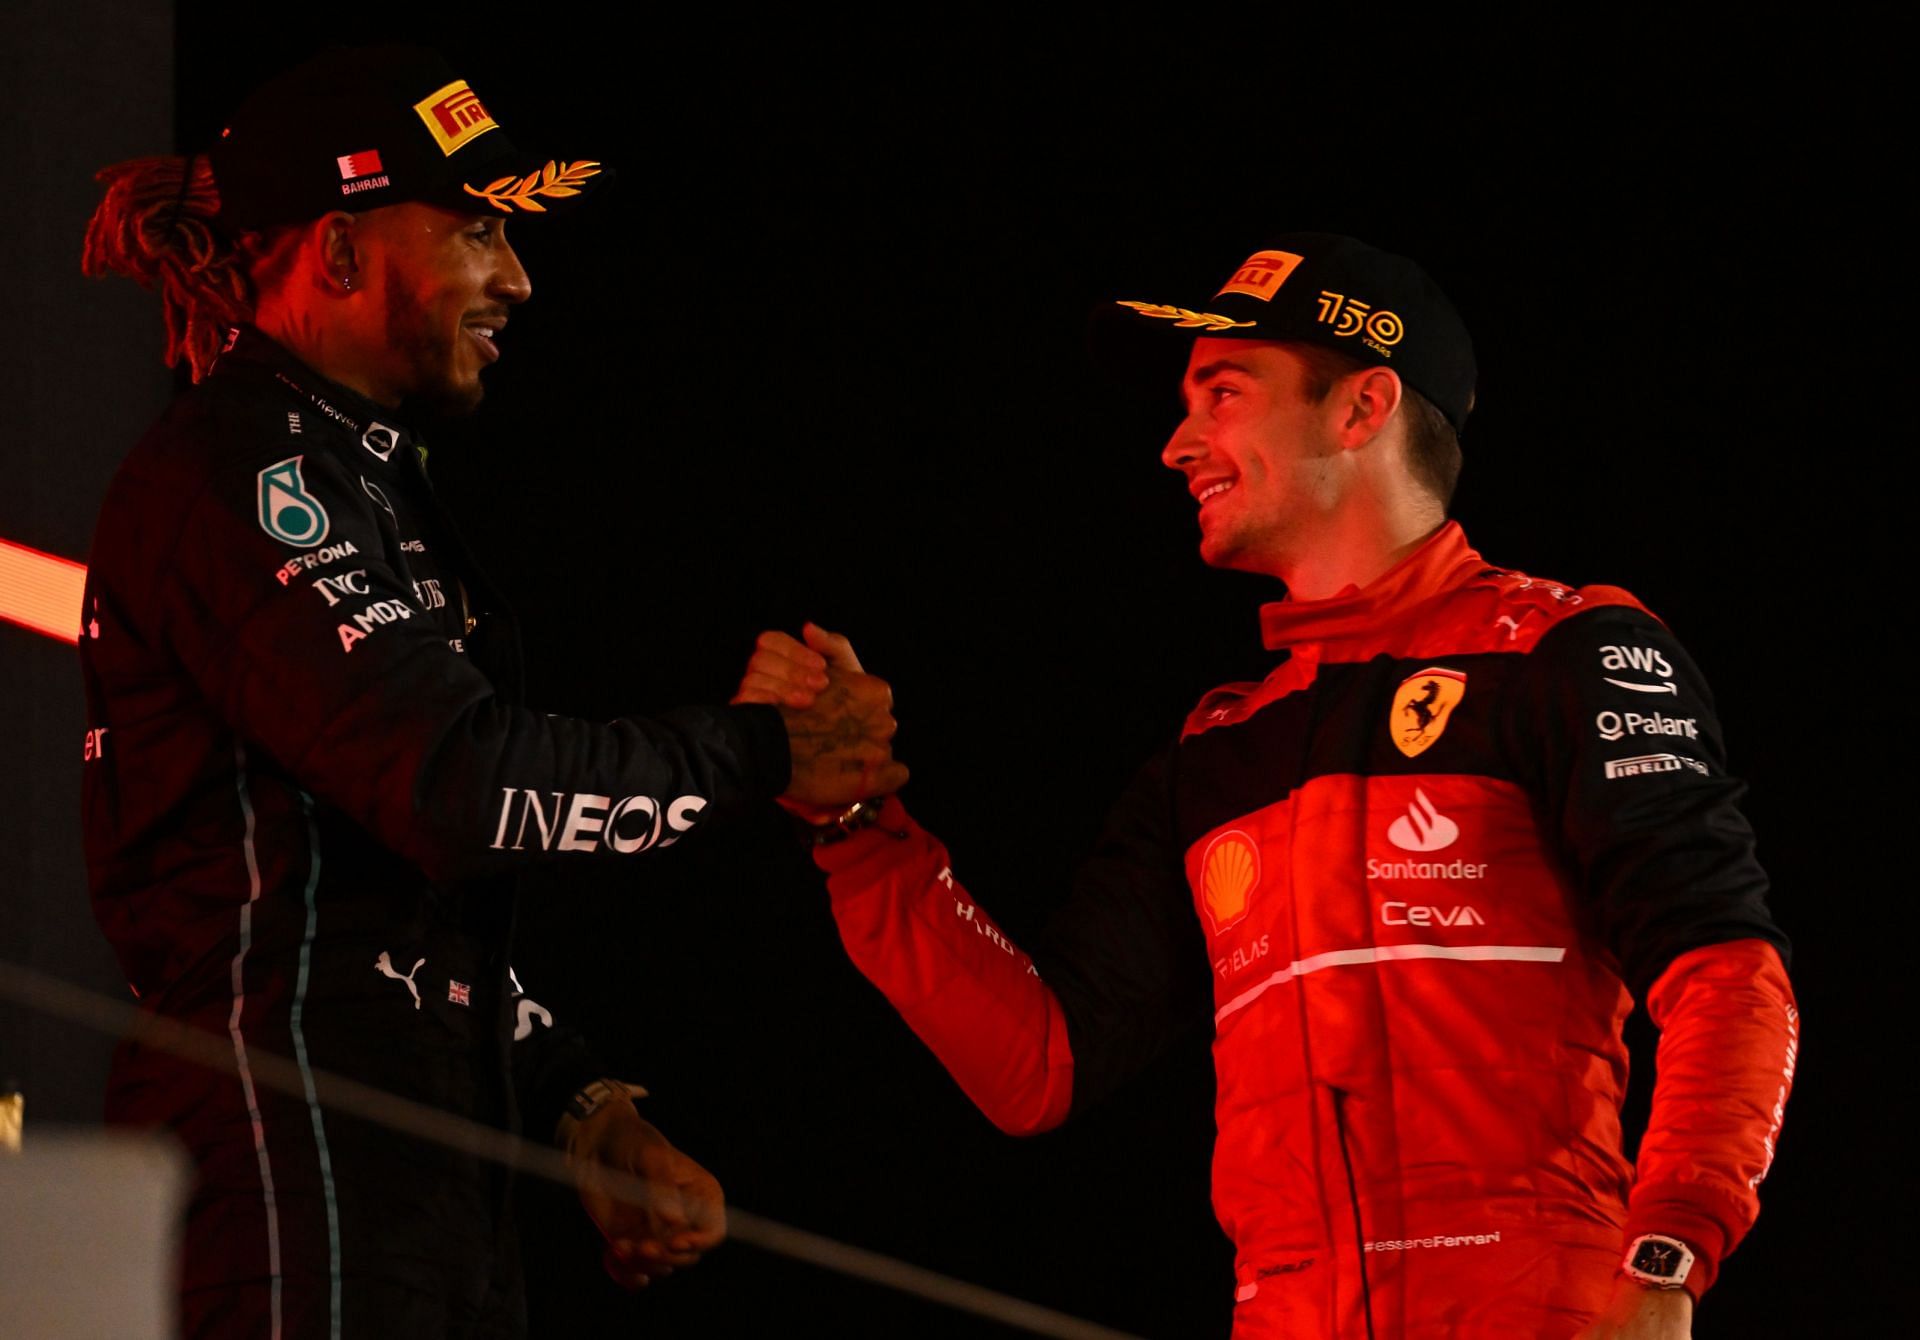 Lewis Hamilton (left) and Charles Leclerc share a moment on the podium at the 2022 F1 Bahrain GP (Photo by Clive Mason/Getty Images)